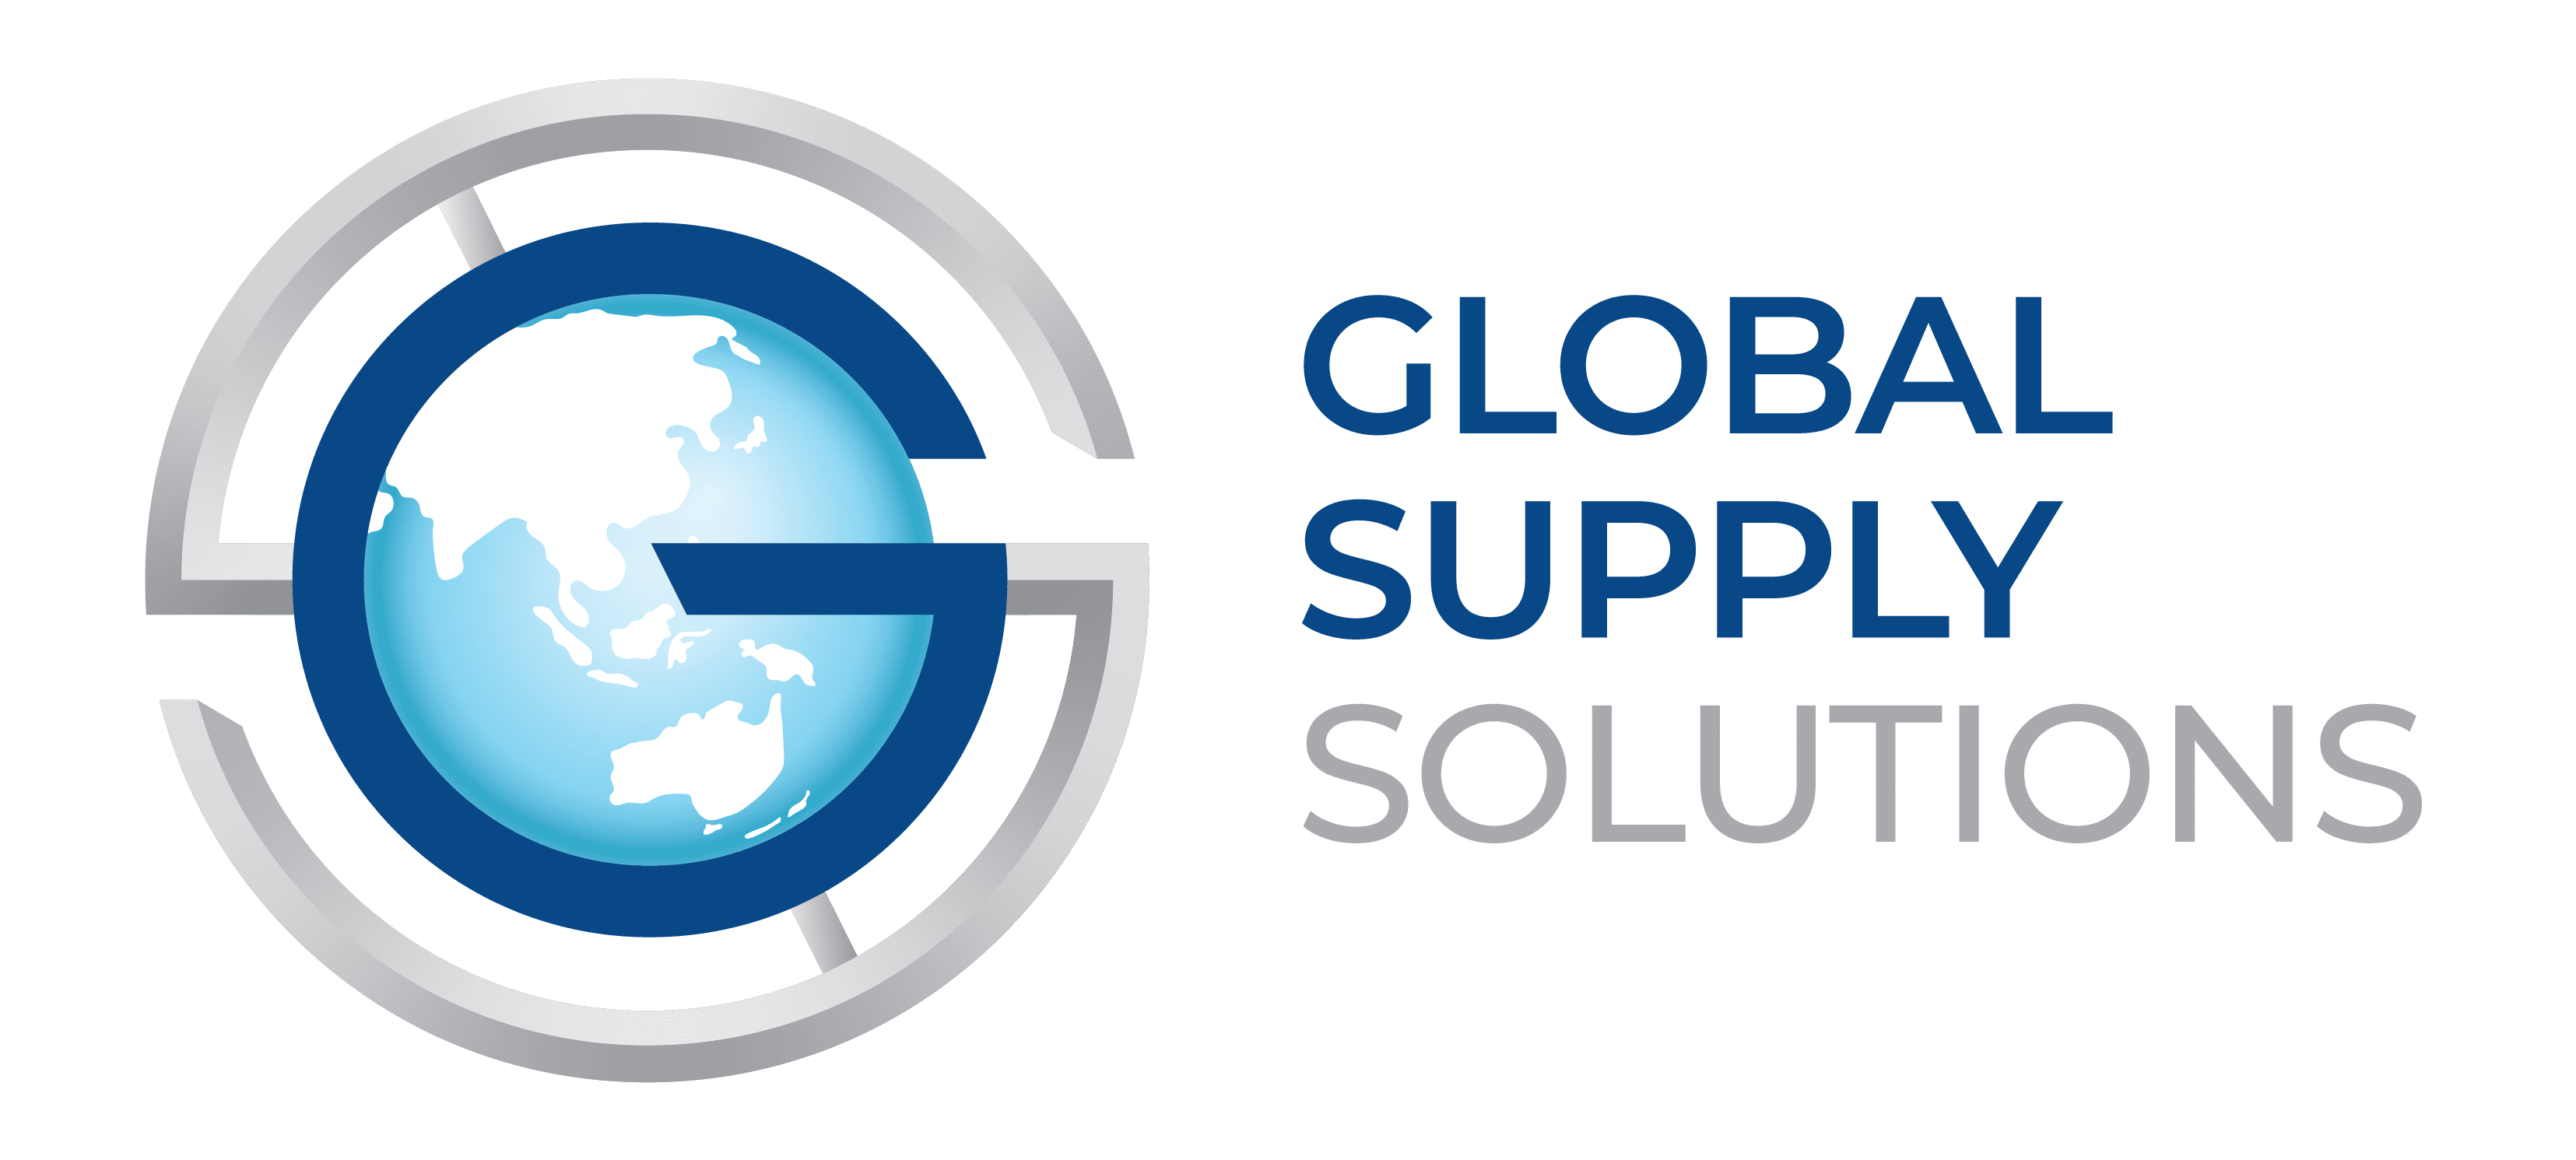 Global Supply Solutions